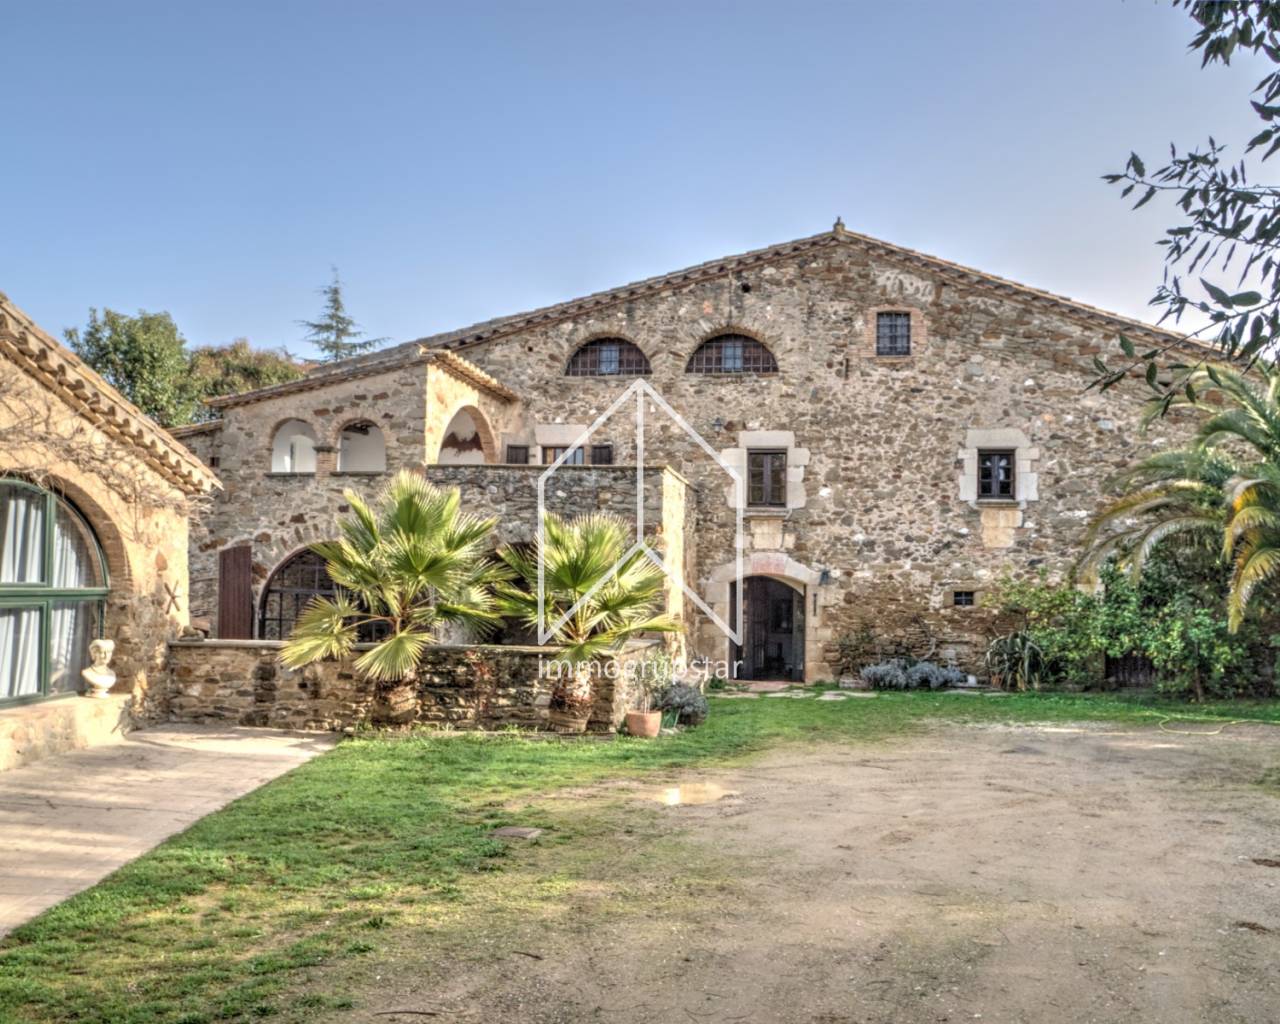 Country house-Masia - Resale - SANT MARTI VELL - GIRONA